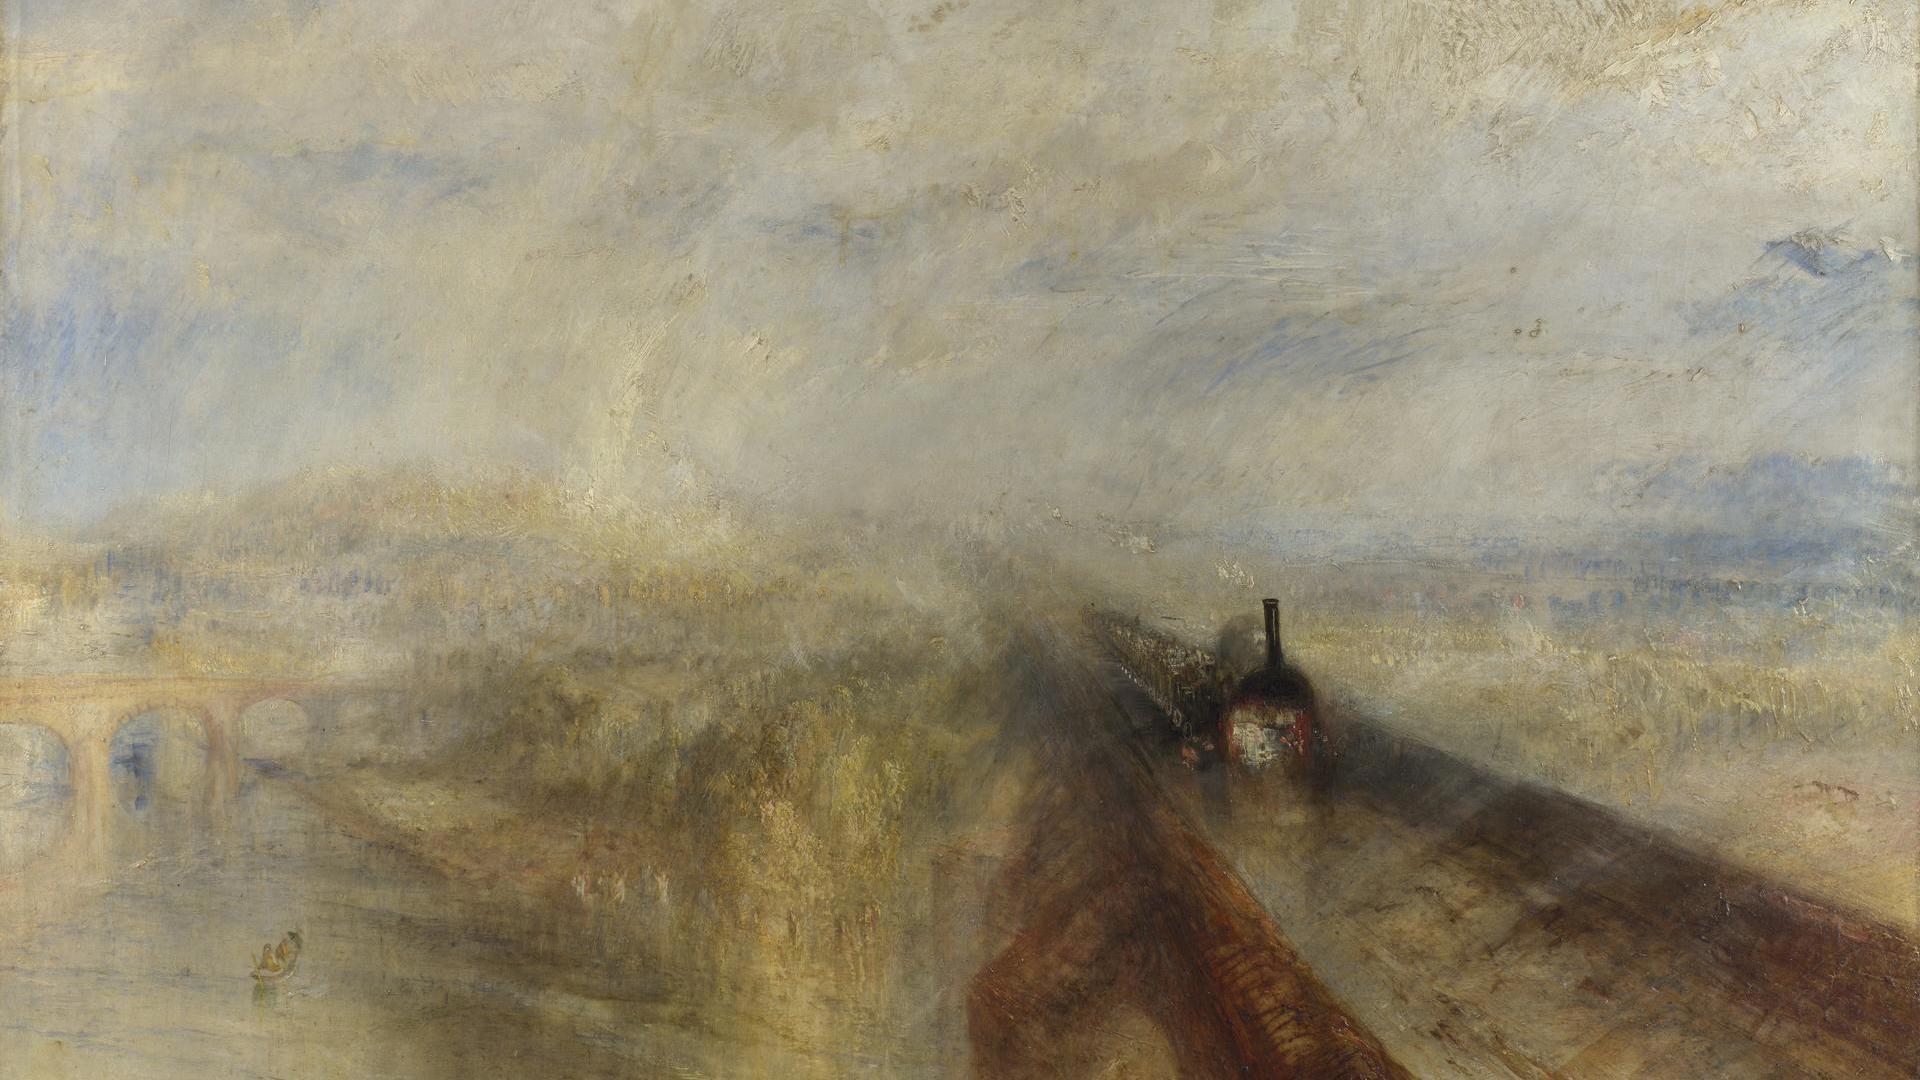 Joseph Mallord William Turner | Rain, Steam, and Speed - The Great Western Railway | NG538 | National Gallery, London